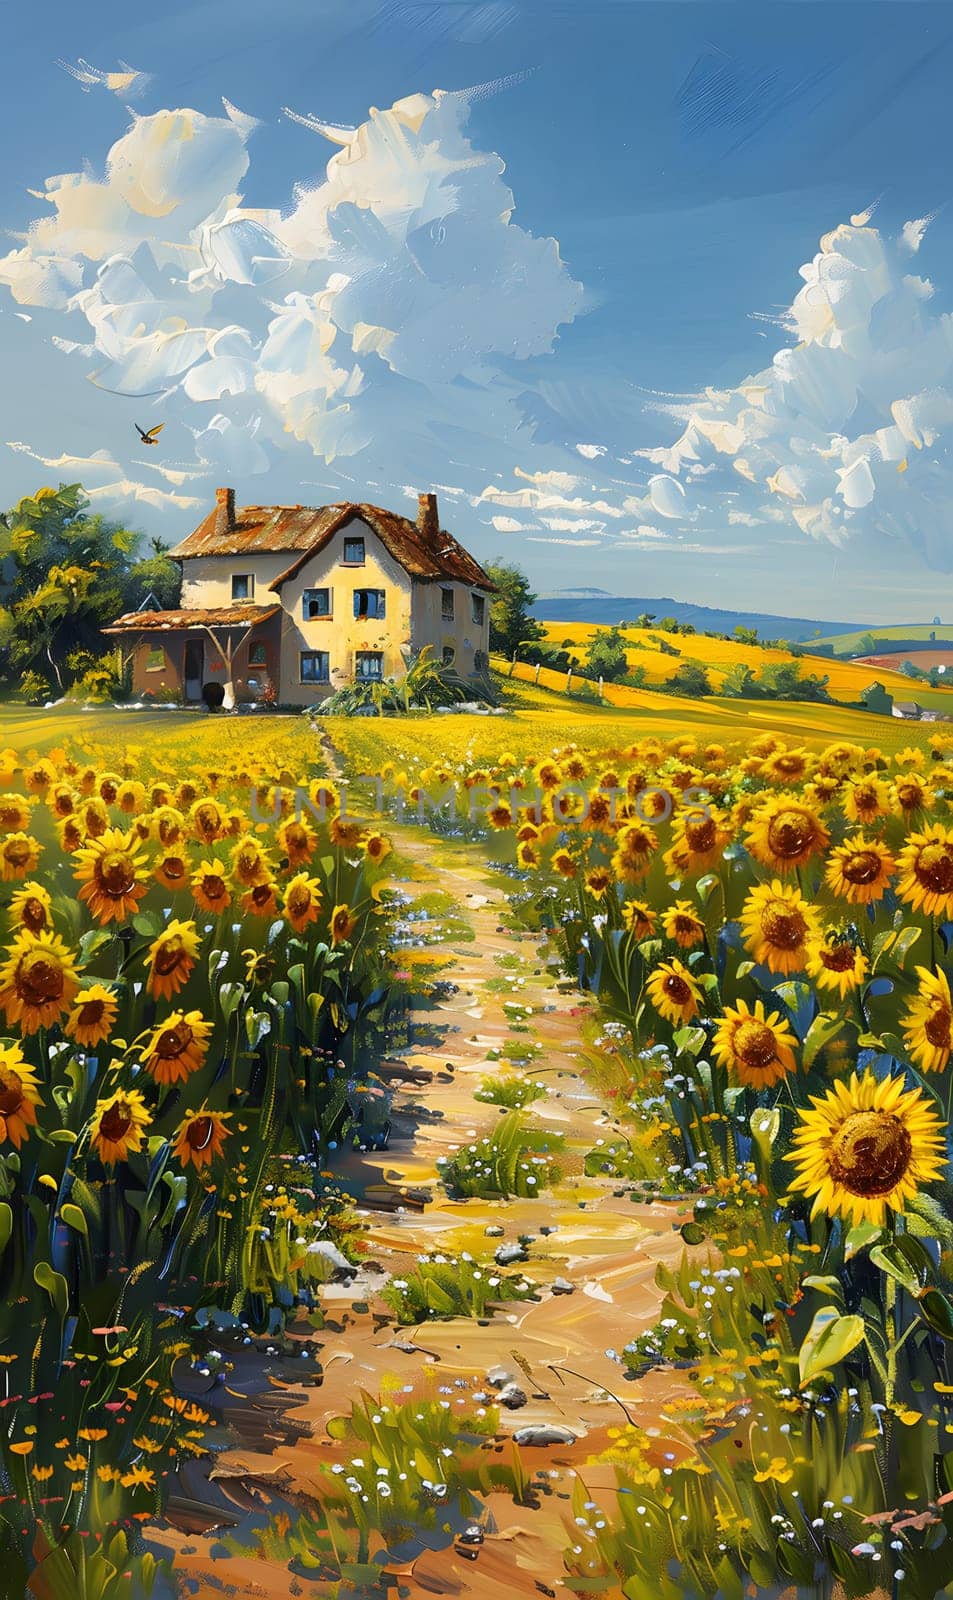 A beautiful painting depicting a house surrounded by sunflowers under a cloudy sky. The natural landscape showcases the harmony between the building and the vibrant plants